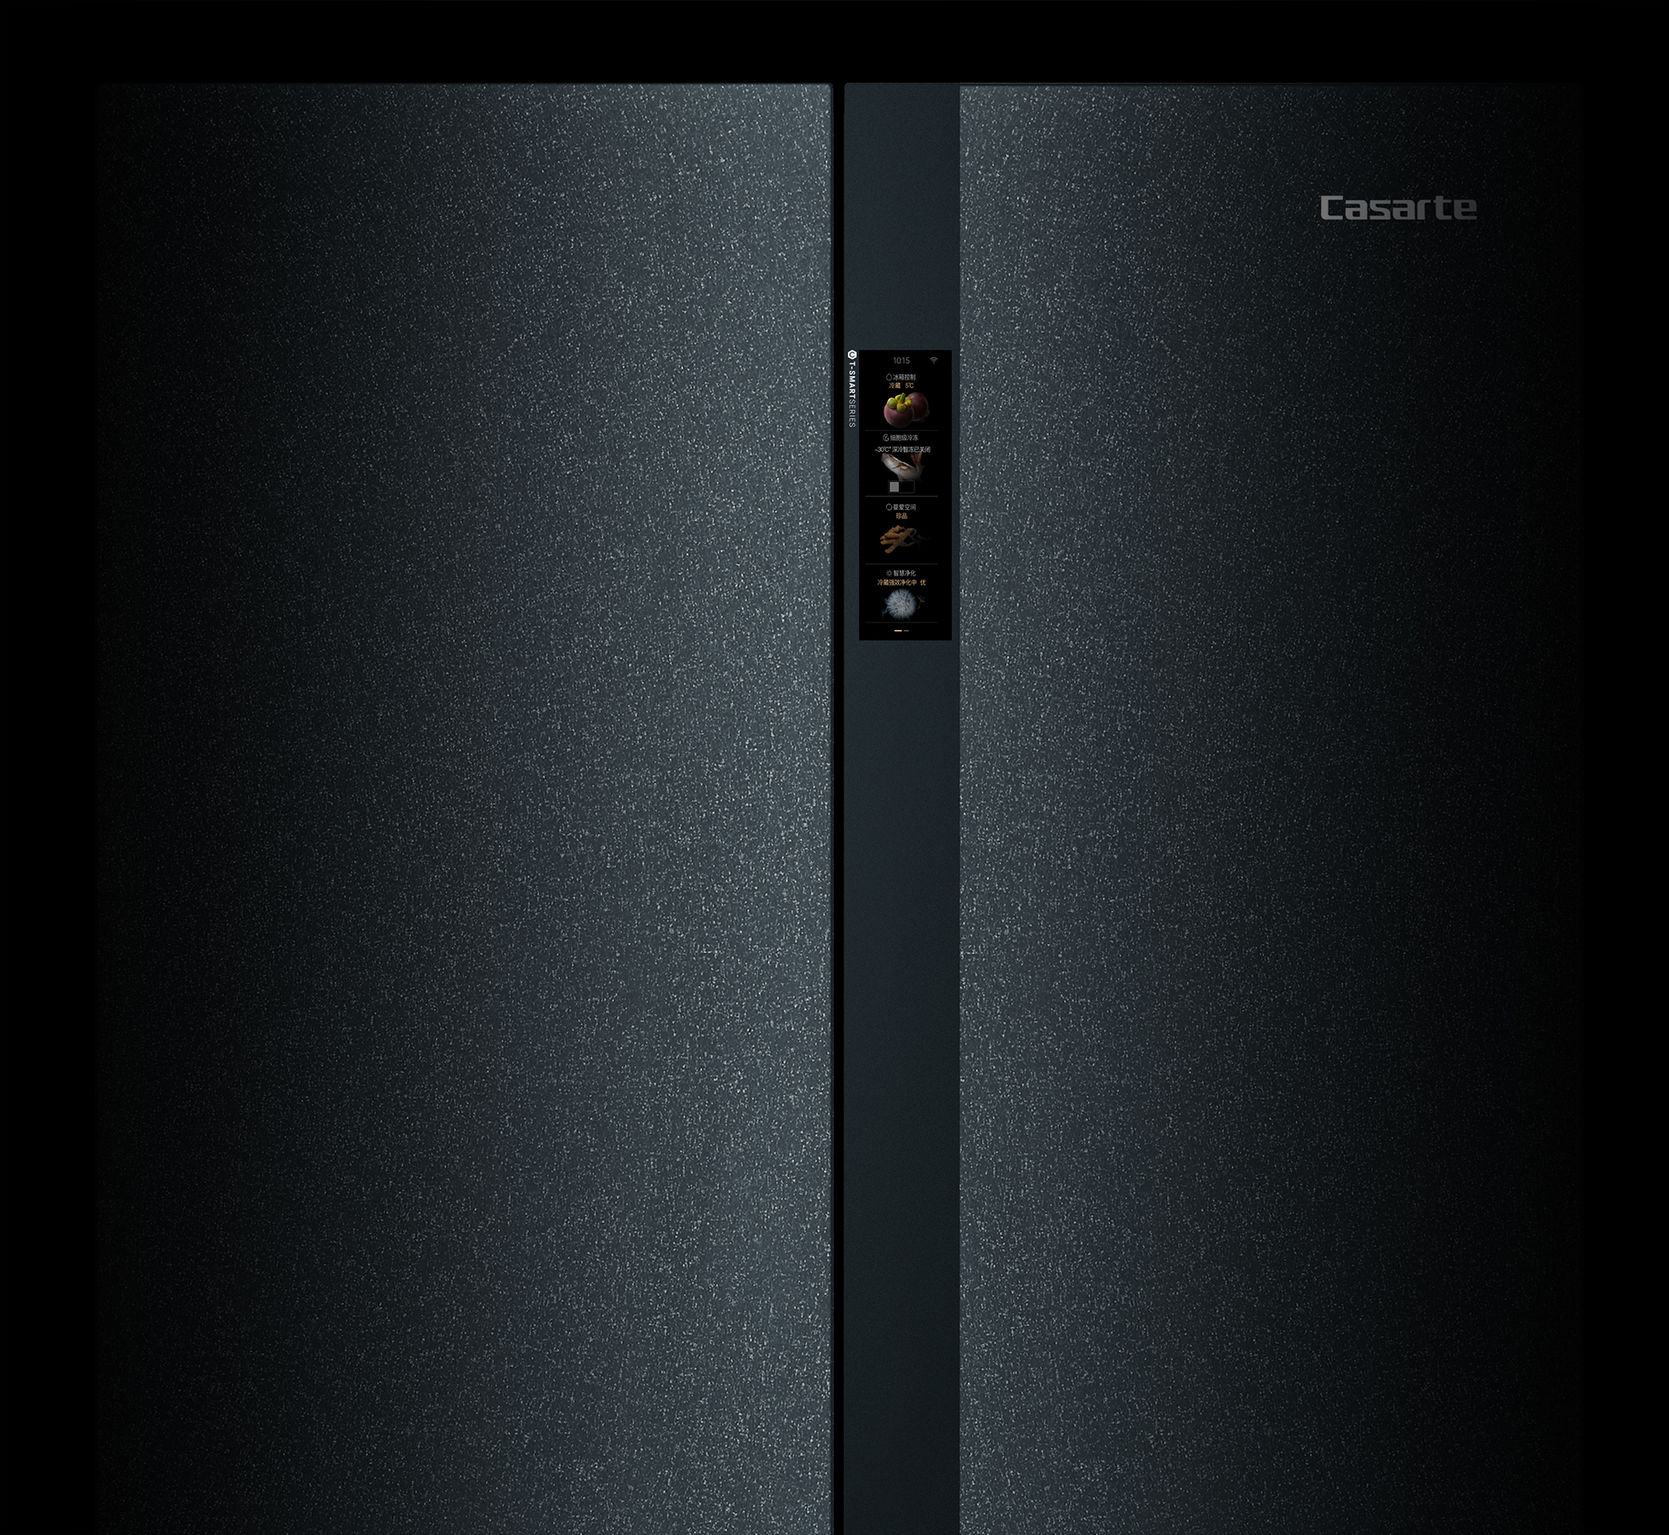 Casarte “TianCheng”series French refrigerator